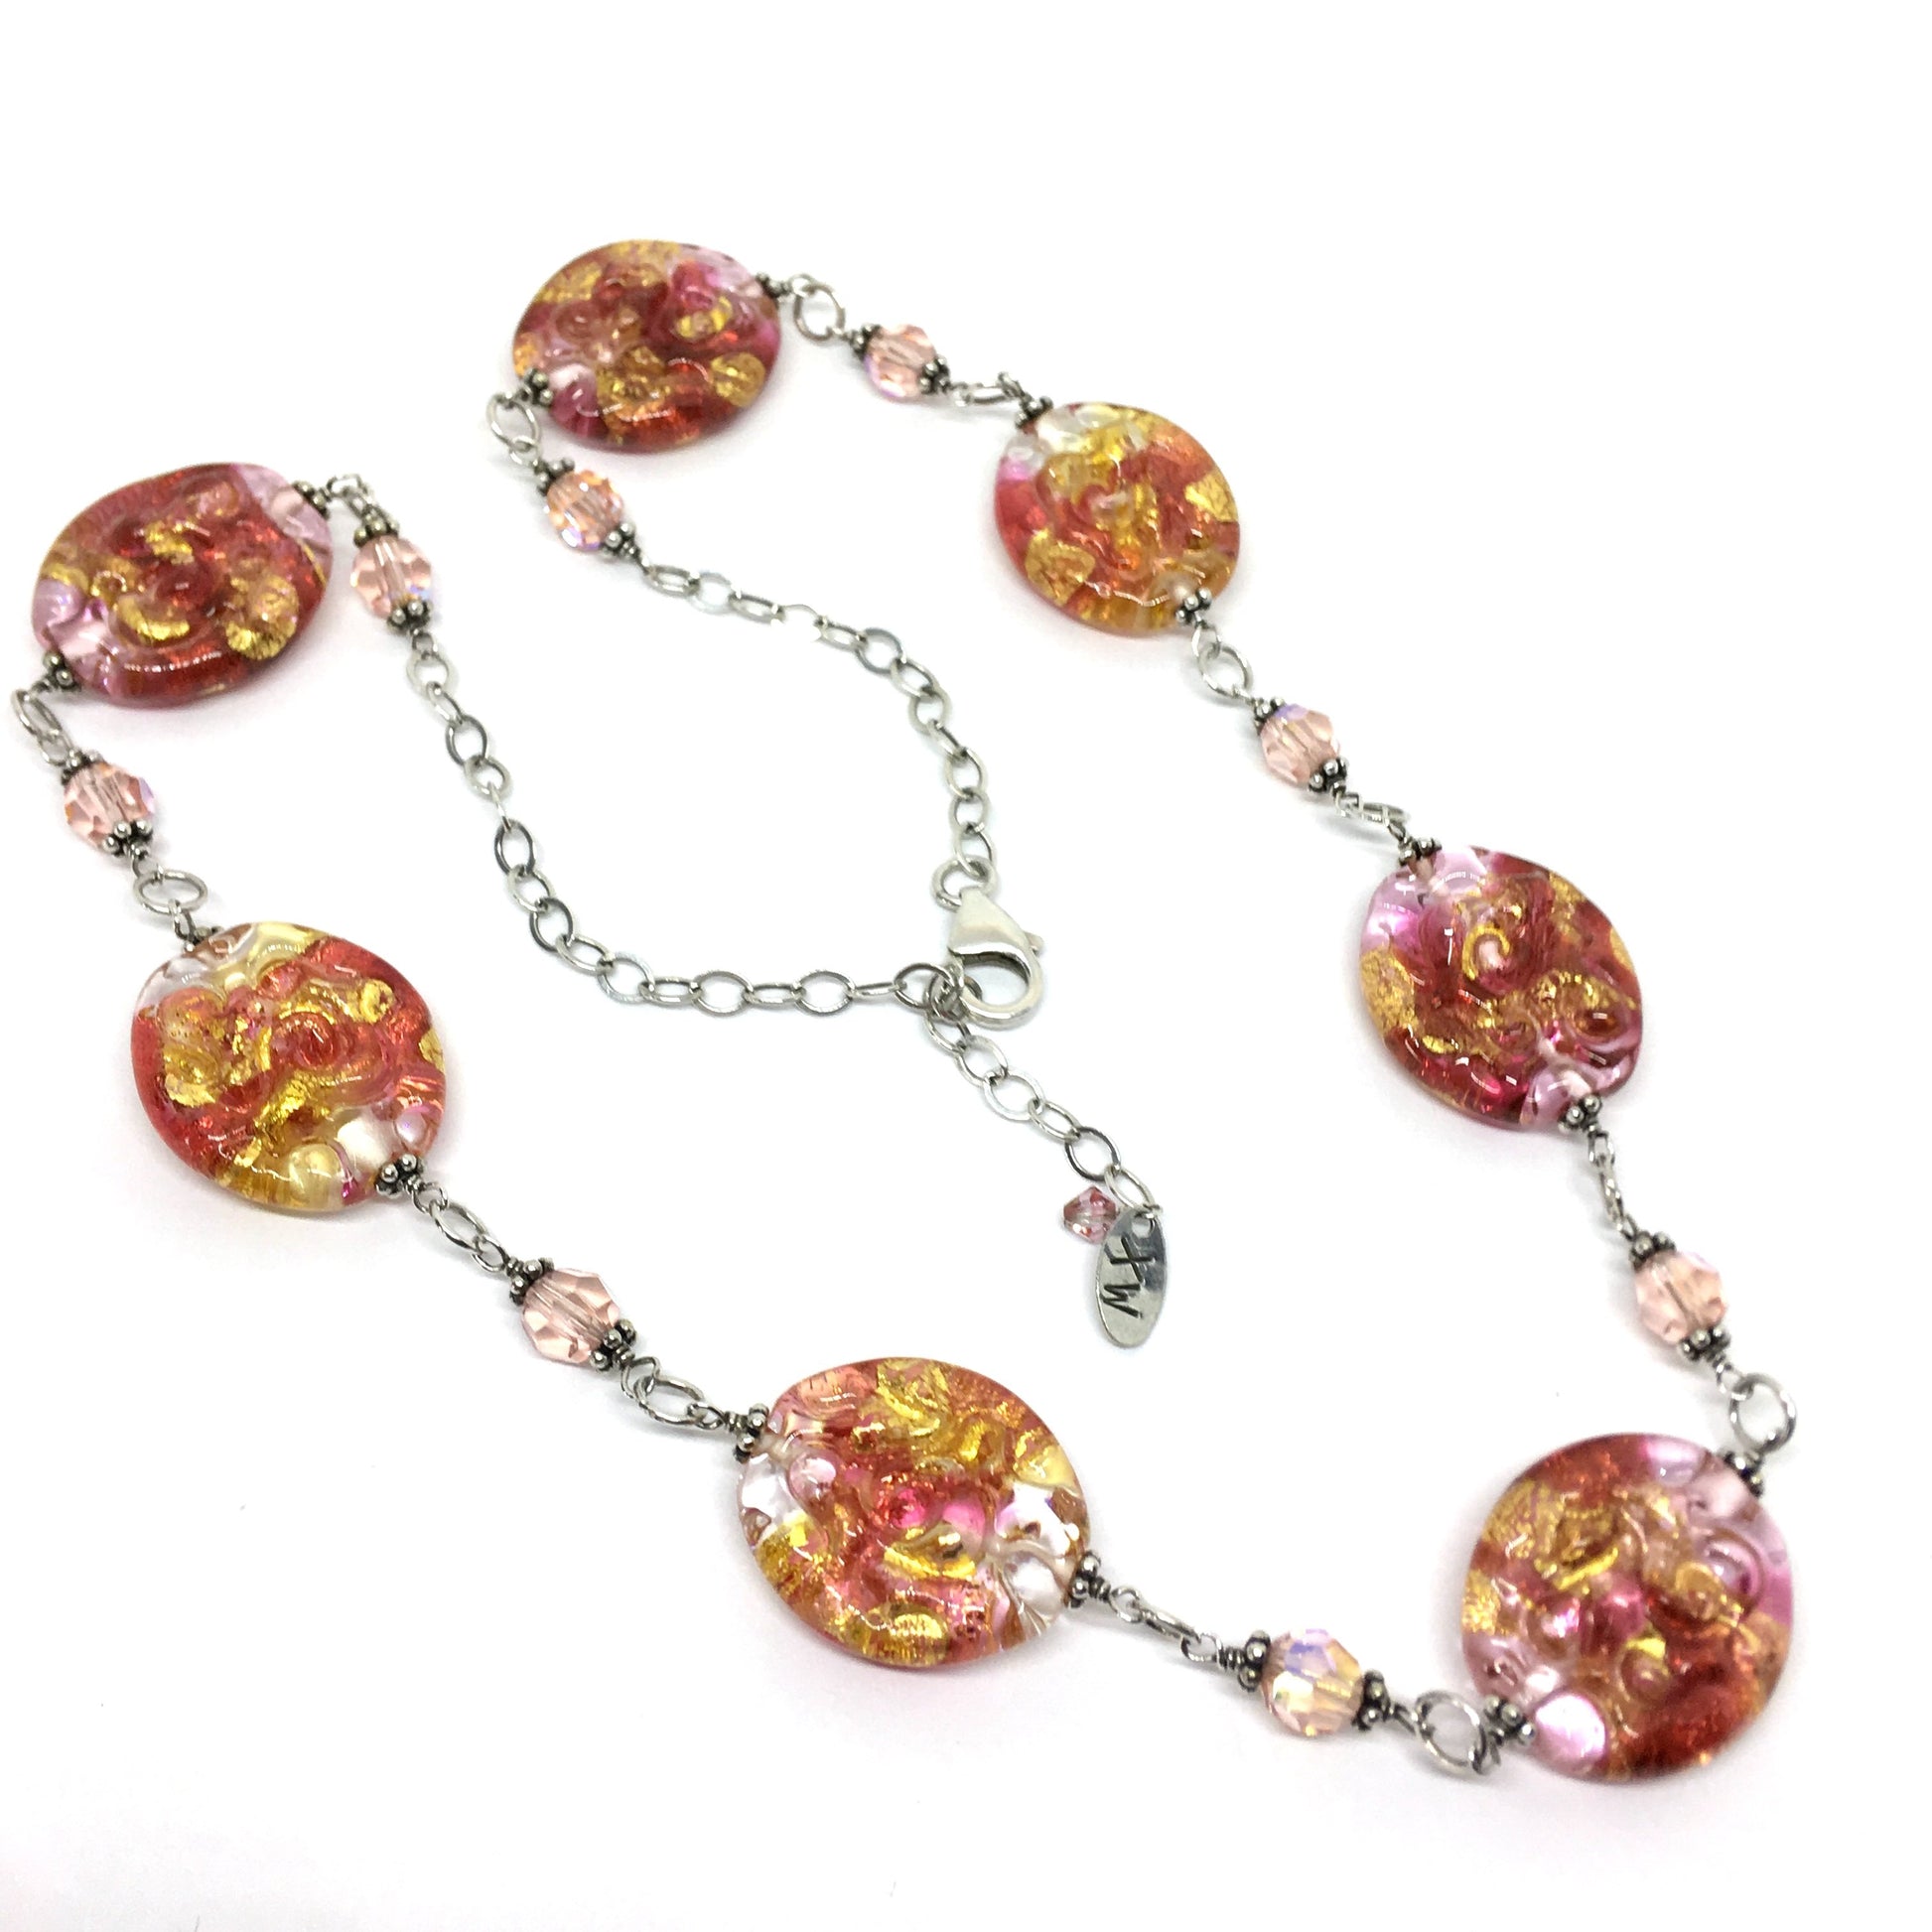 Necklace - Sterling Silver - Golden Sunset Murano Glass Bead Necklace -21 inch Chain Necklace - Layering Satellite Chain - Blingschlingers